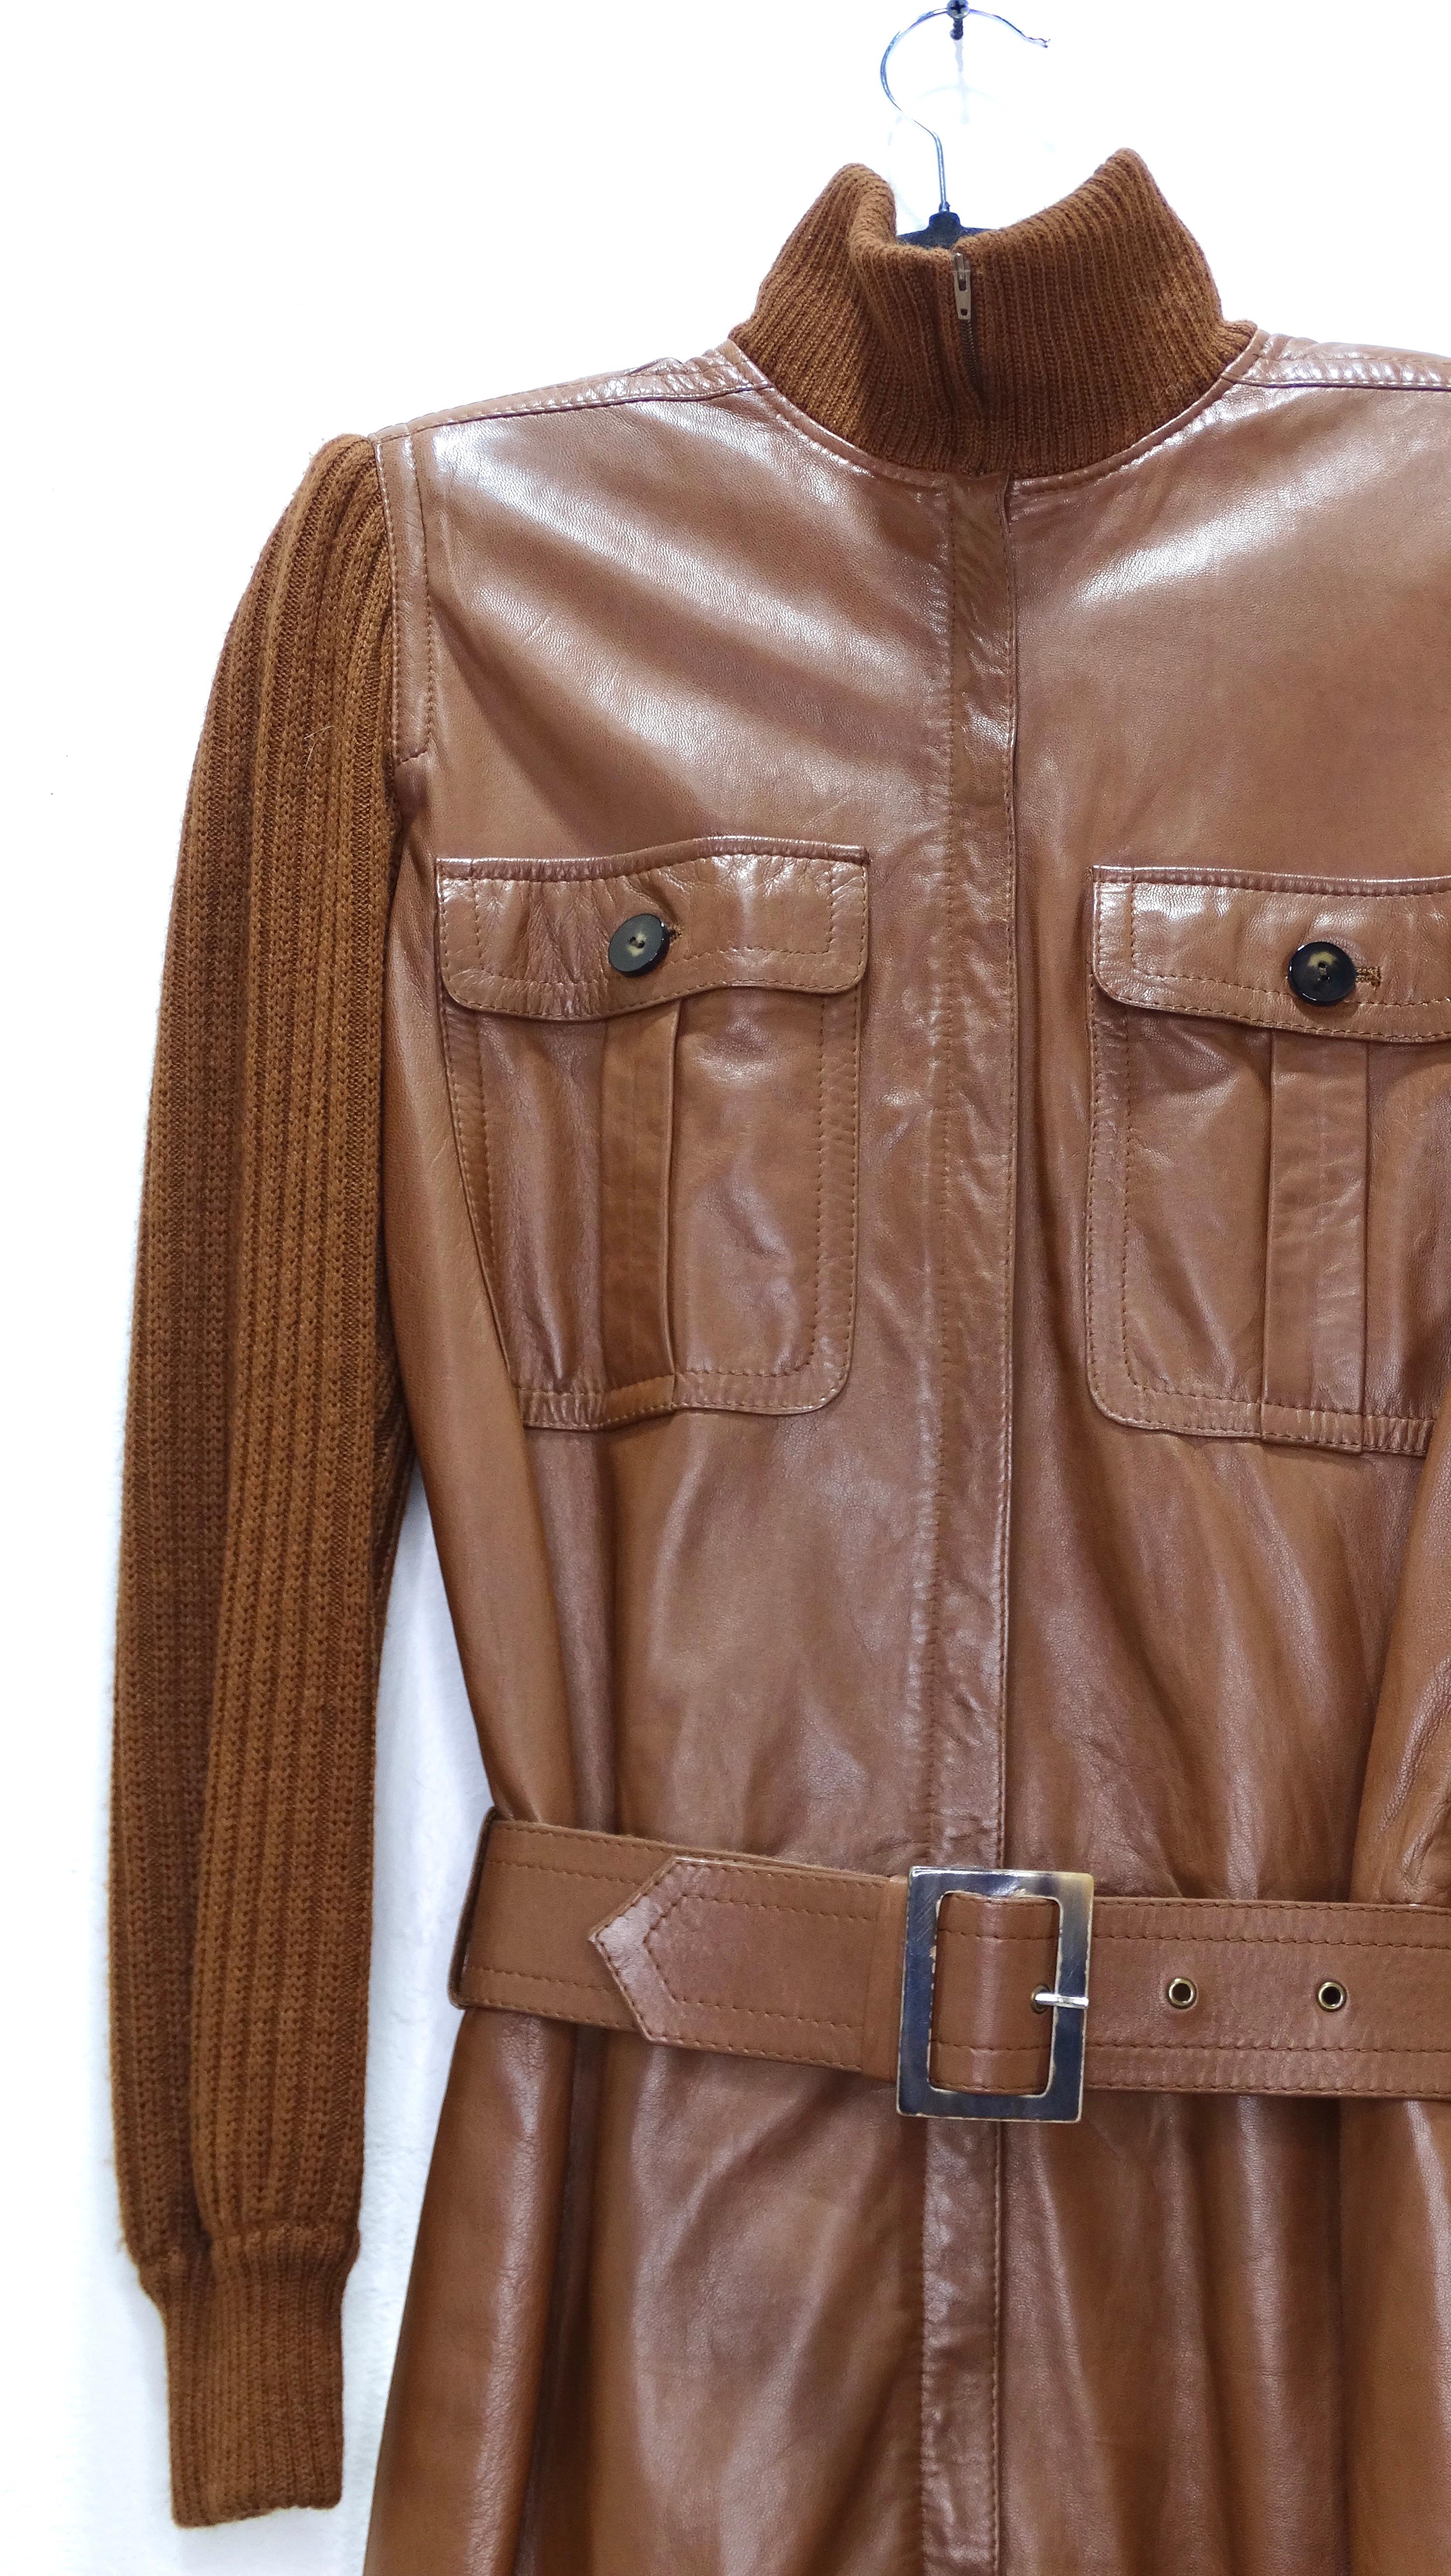 Get your hands on this vintage 1980's Valentino gem. This has a beautifully soft camel colored leather with a knit arms and collar. It has a full zip on the center that could be worn open as a jacket or zipped as a dress. It has a beautiful belt